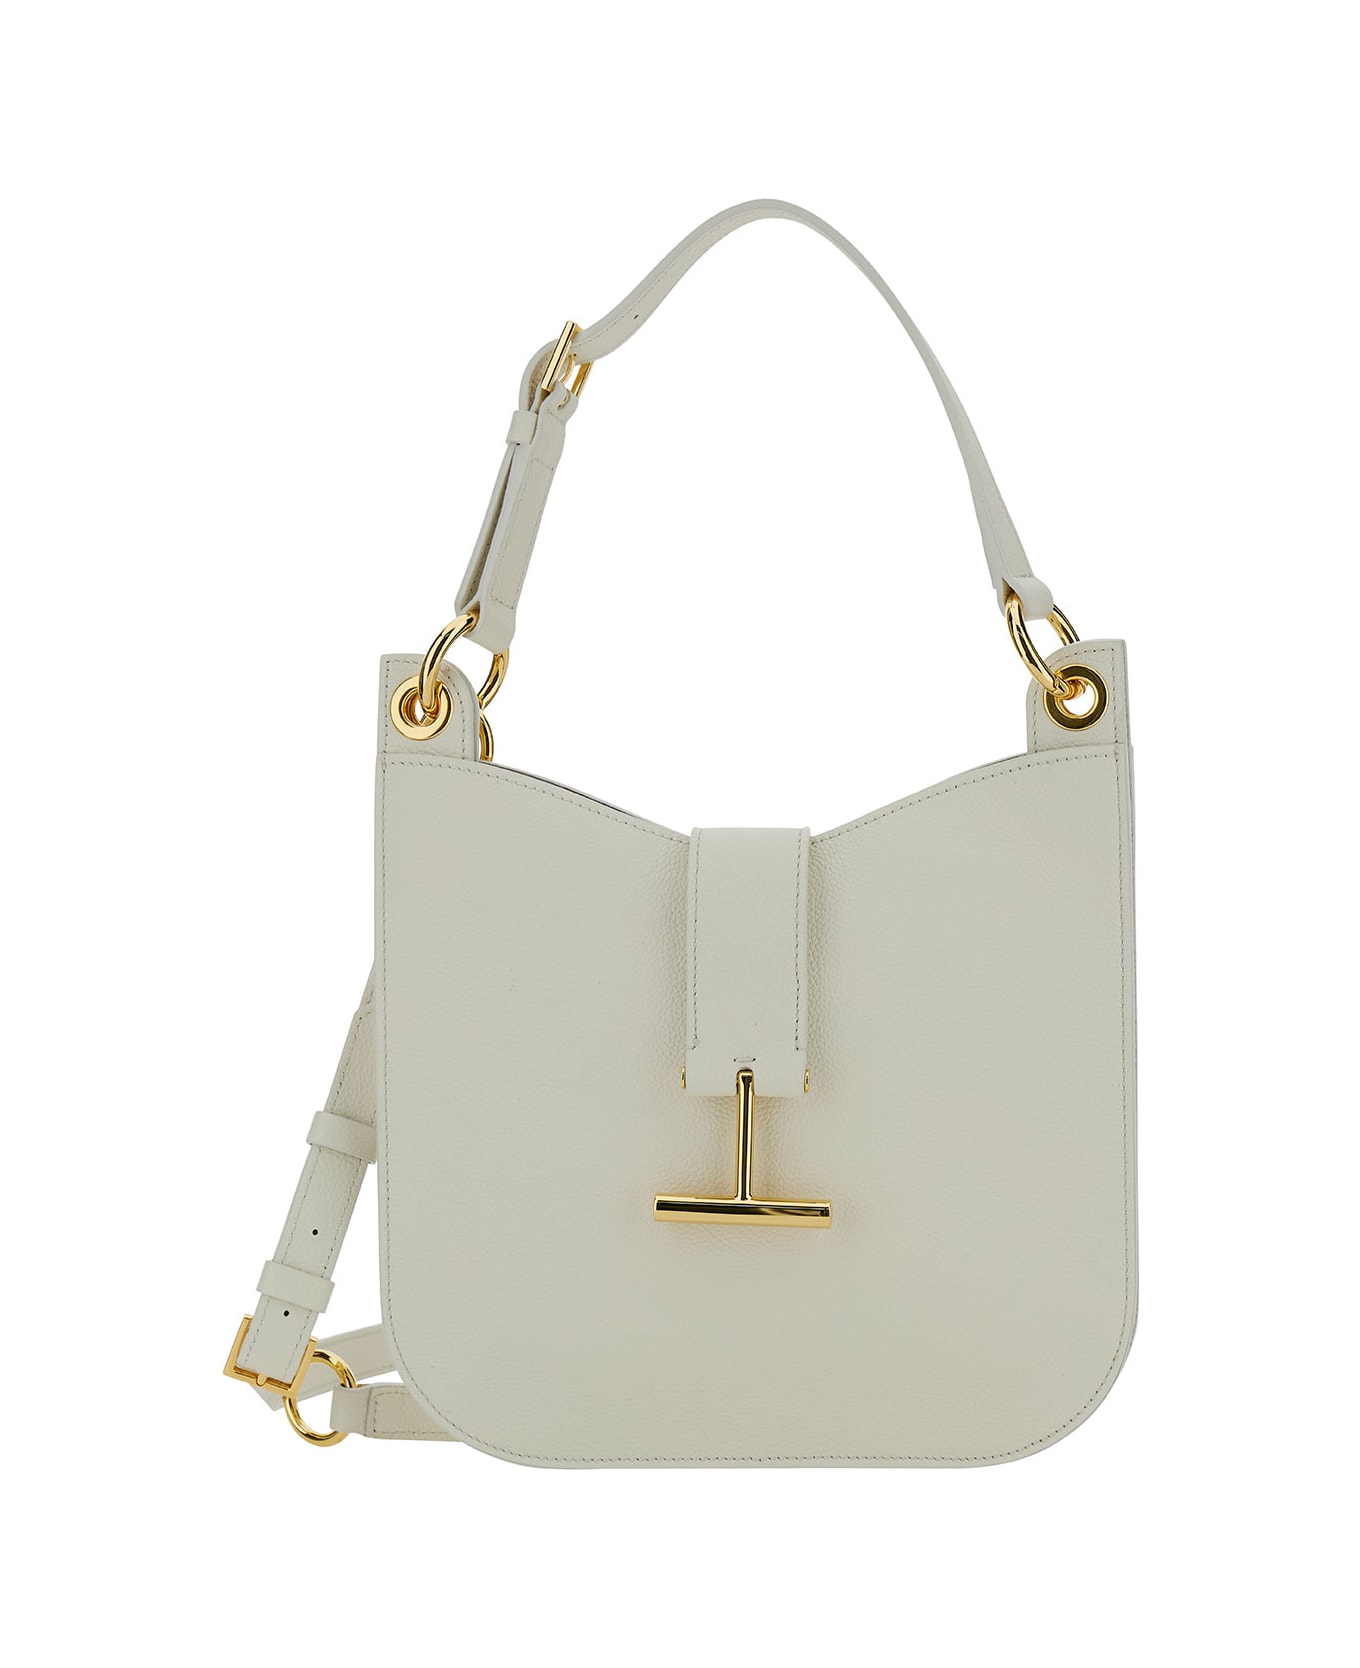 Tom Ford 'tara' White Handbag With T Signature Detail In Grainy Leather Woman - Brown